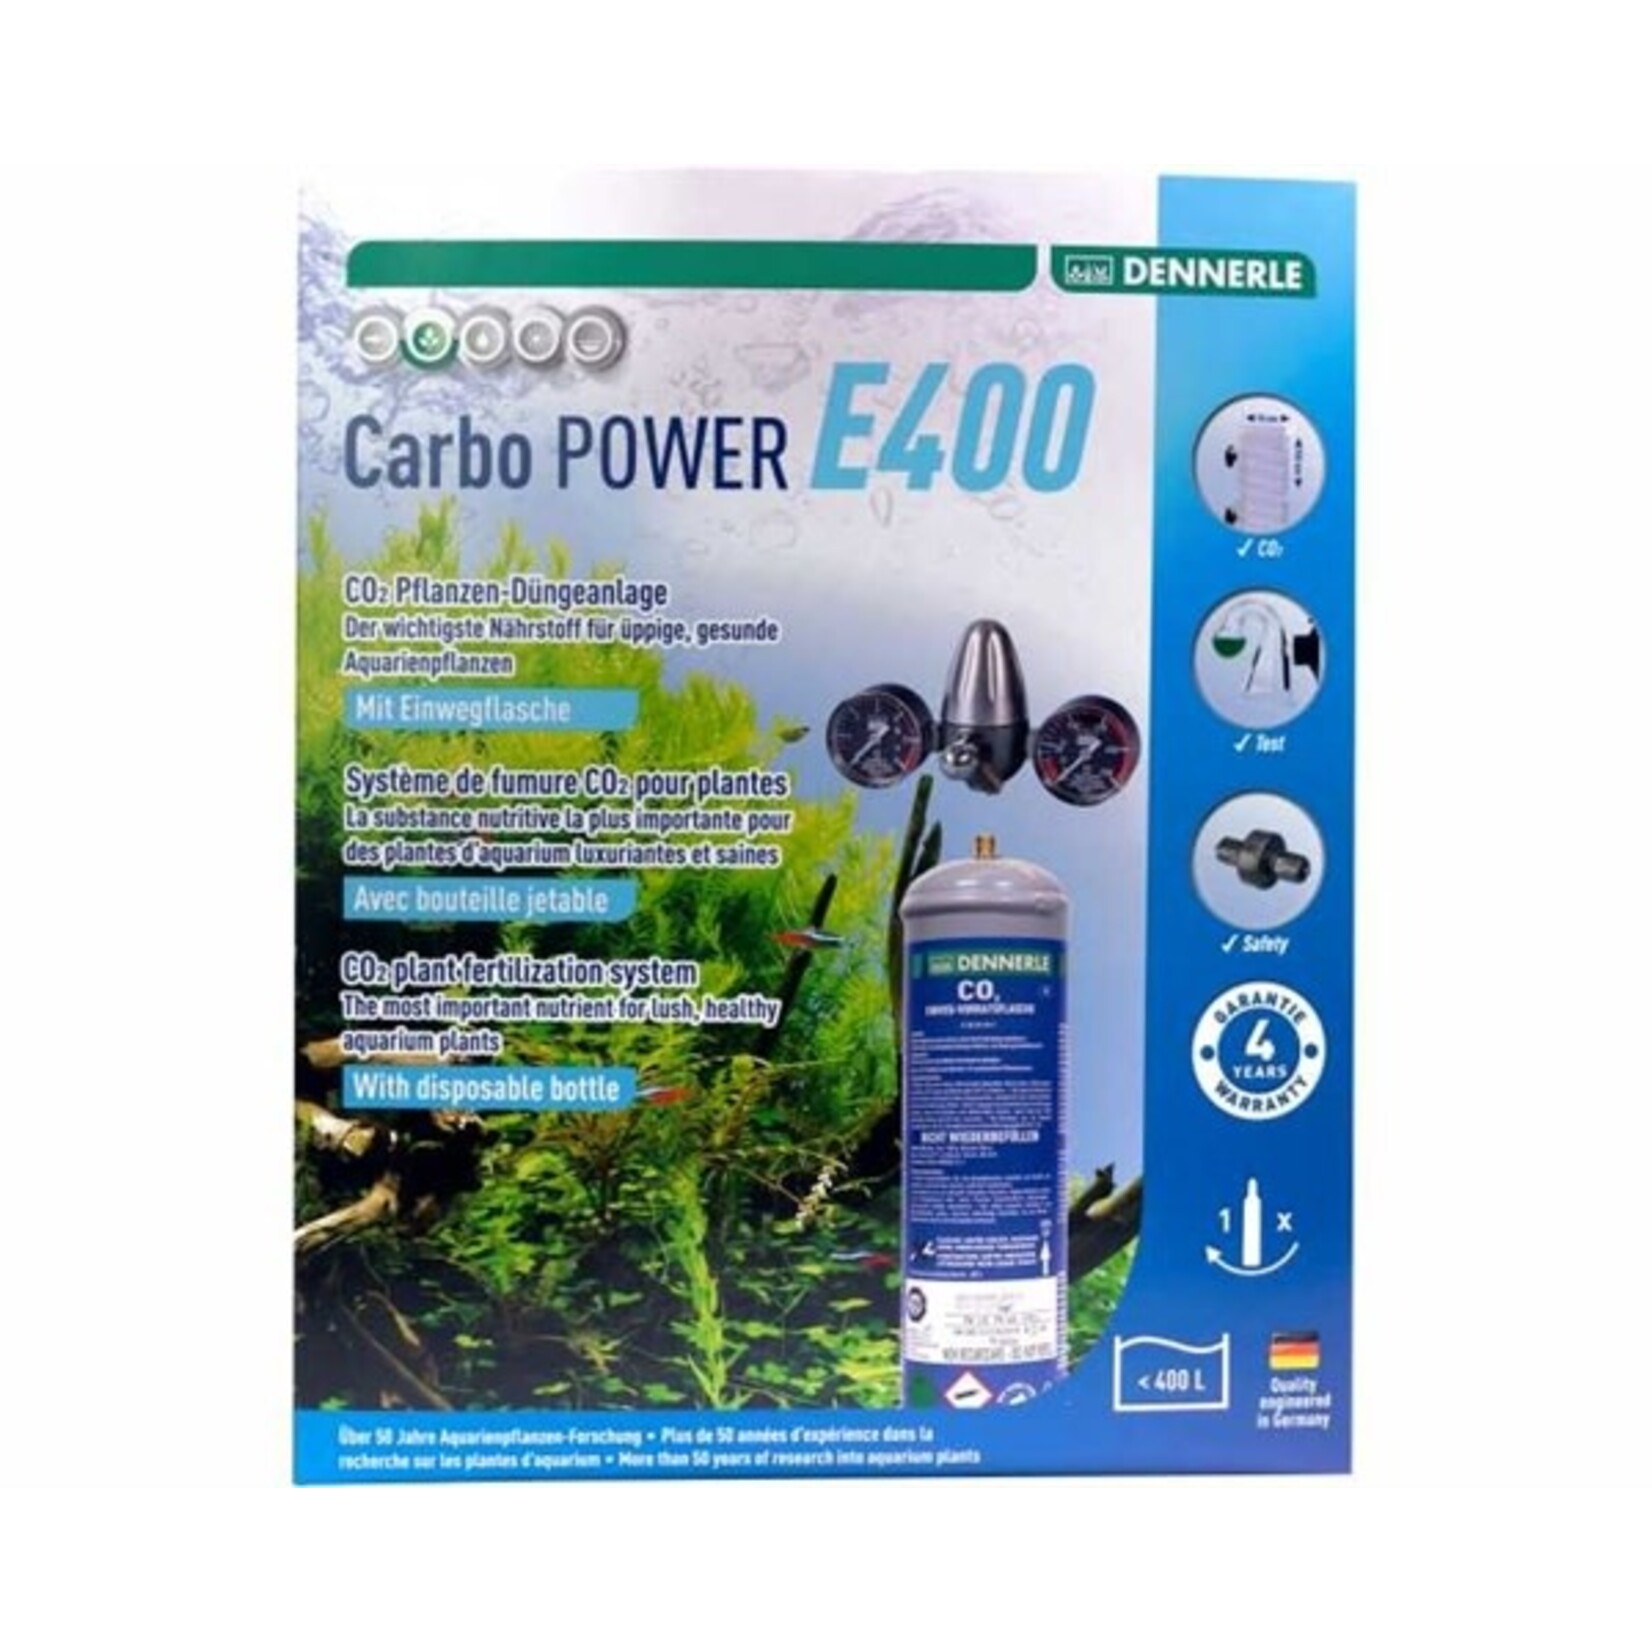 Dennerle DENNERLE CO2 CARBO POWER E400